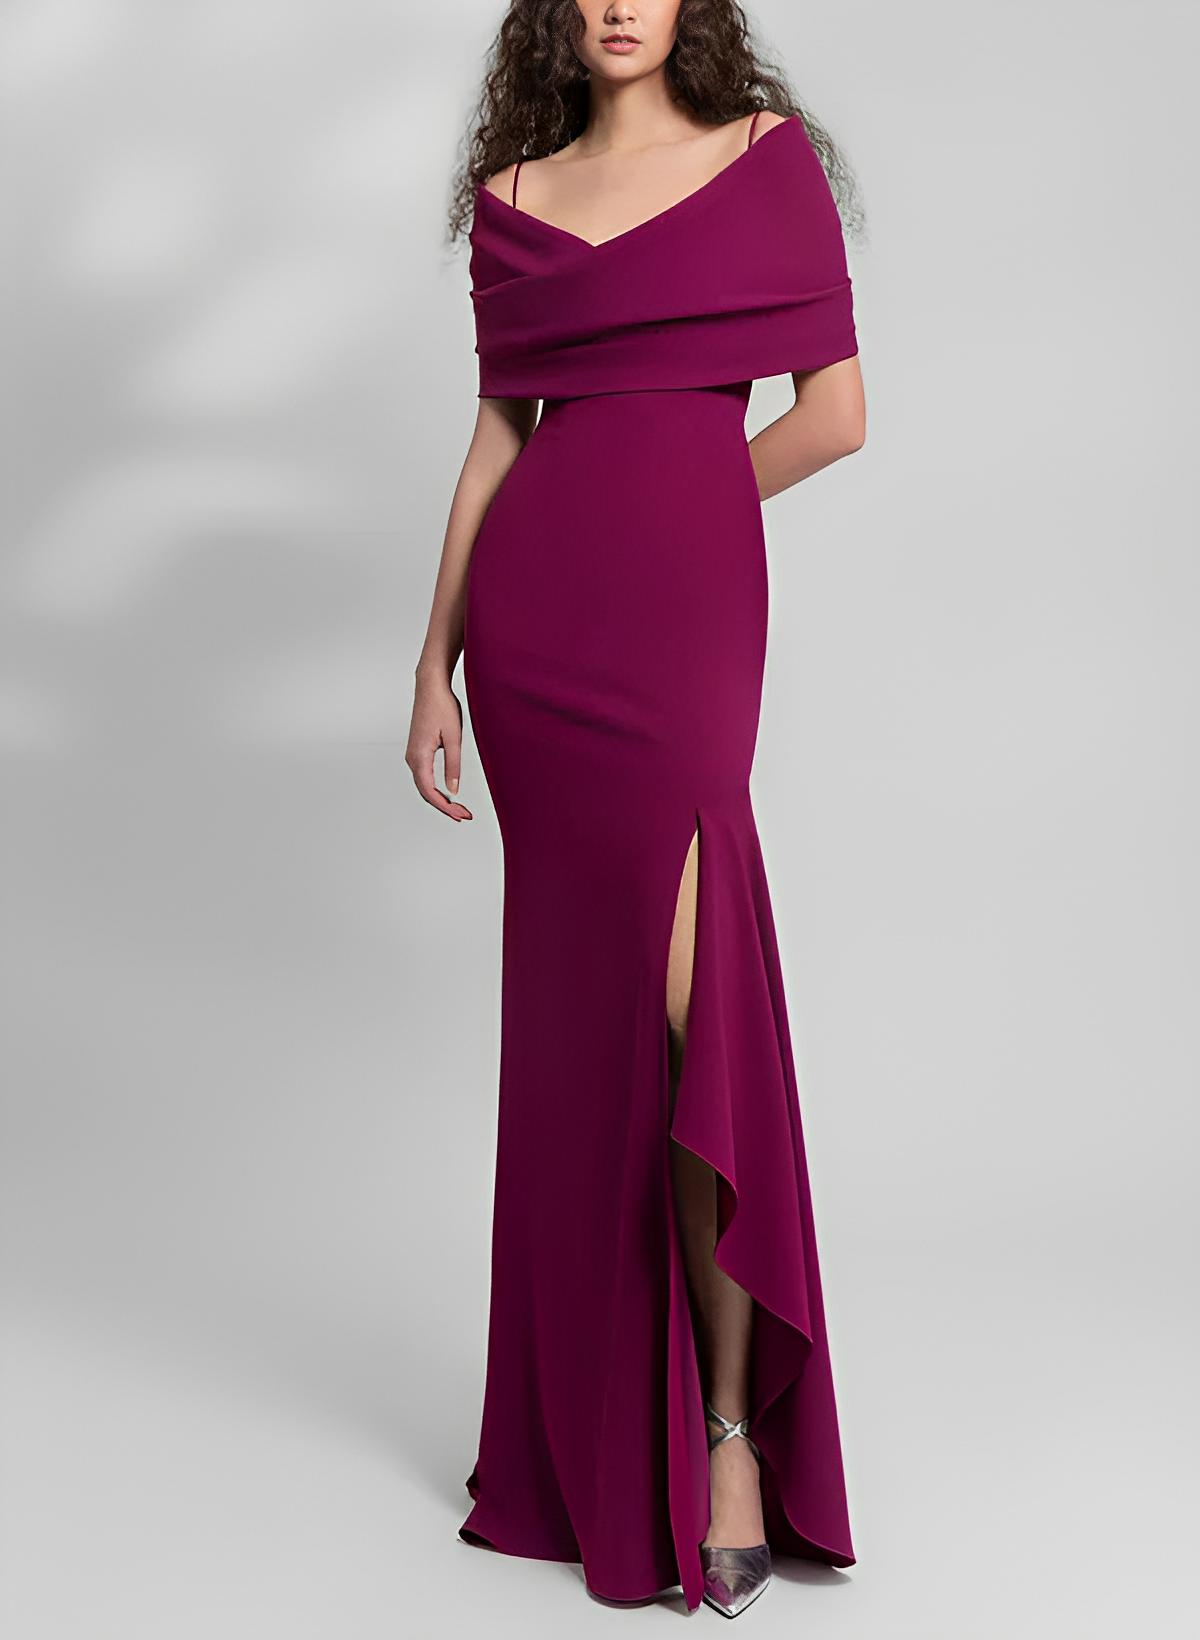 Off-The-Shoulder Sleeveless Sweep Train Elastic Satin Evening Dresses With Split Front